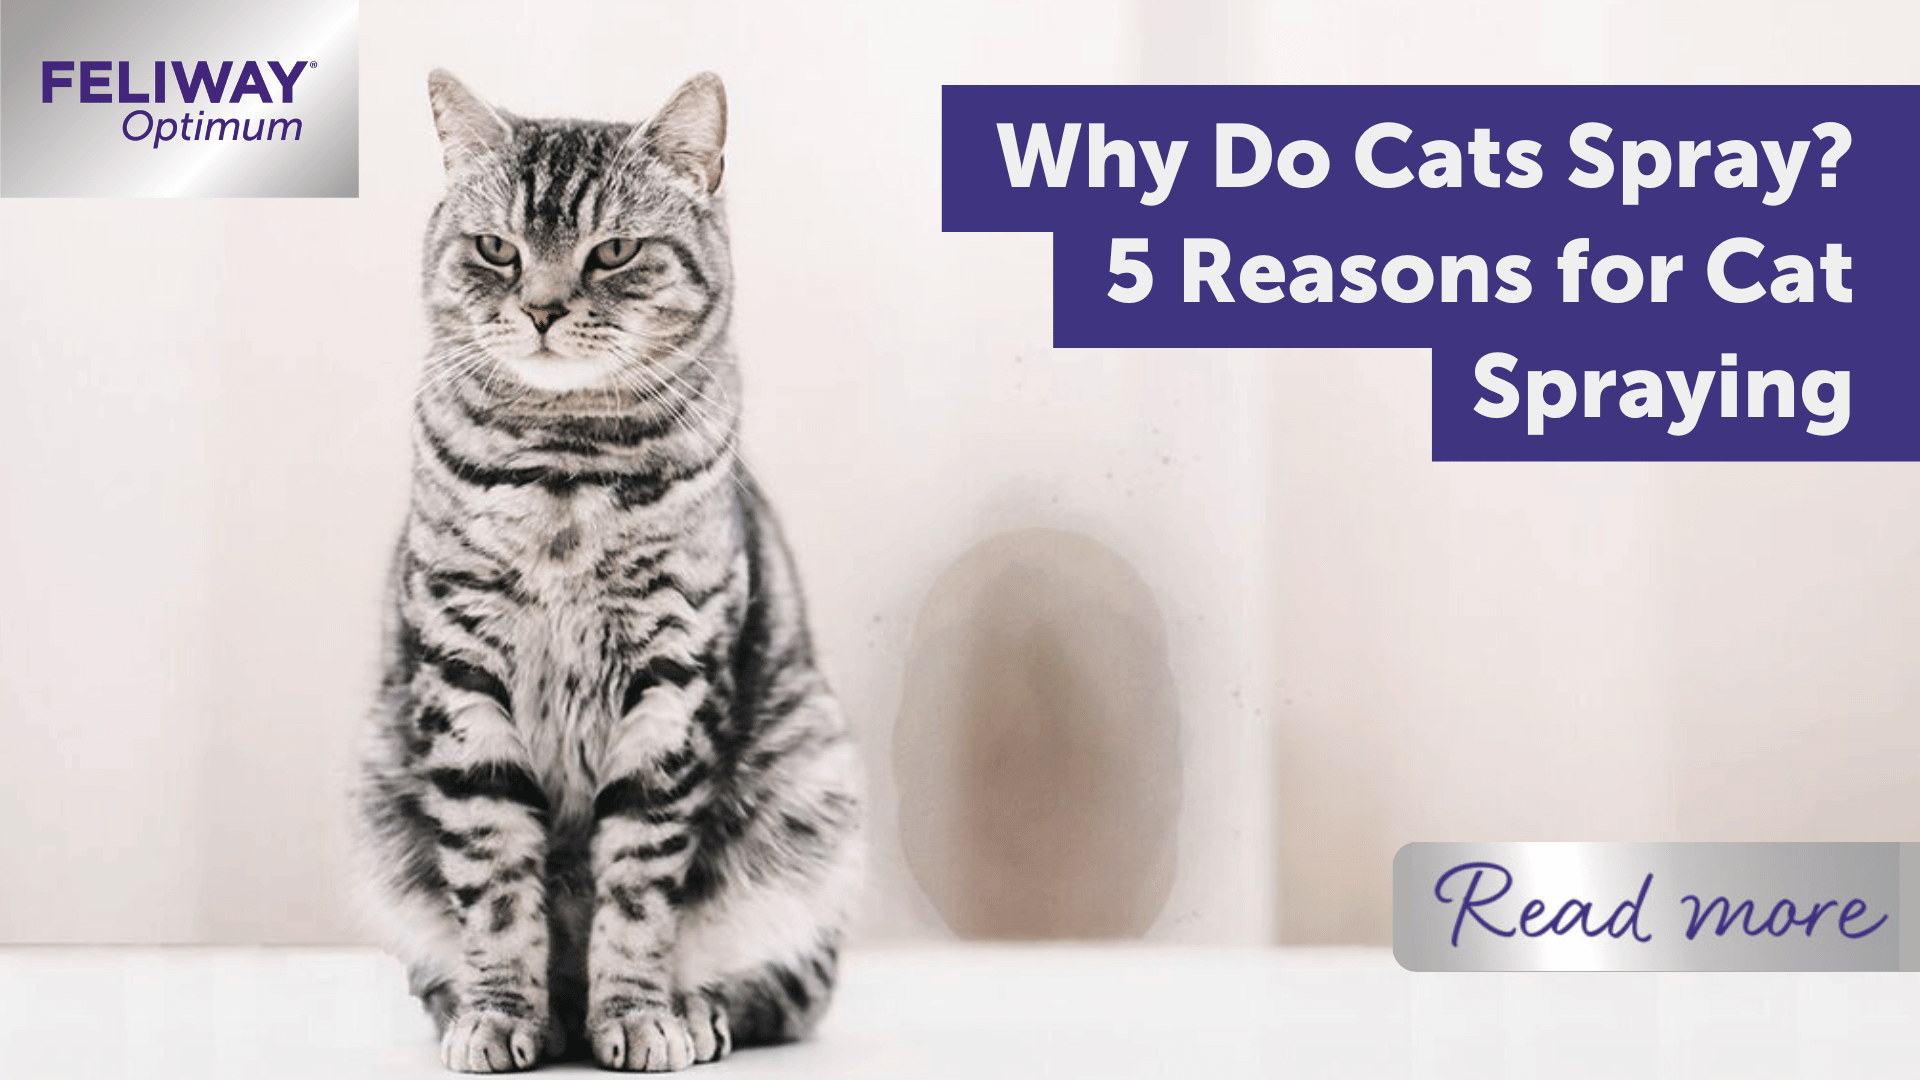 Why Do Cats Spray? 5 Reasons for Cat Spraying